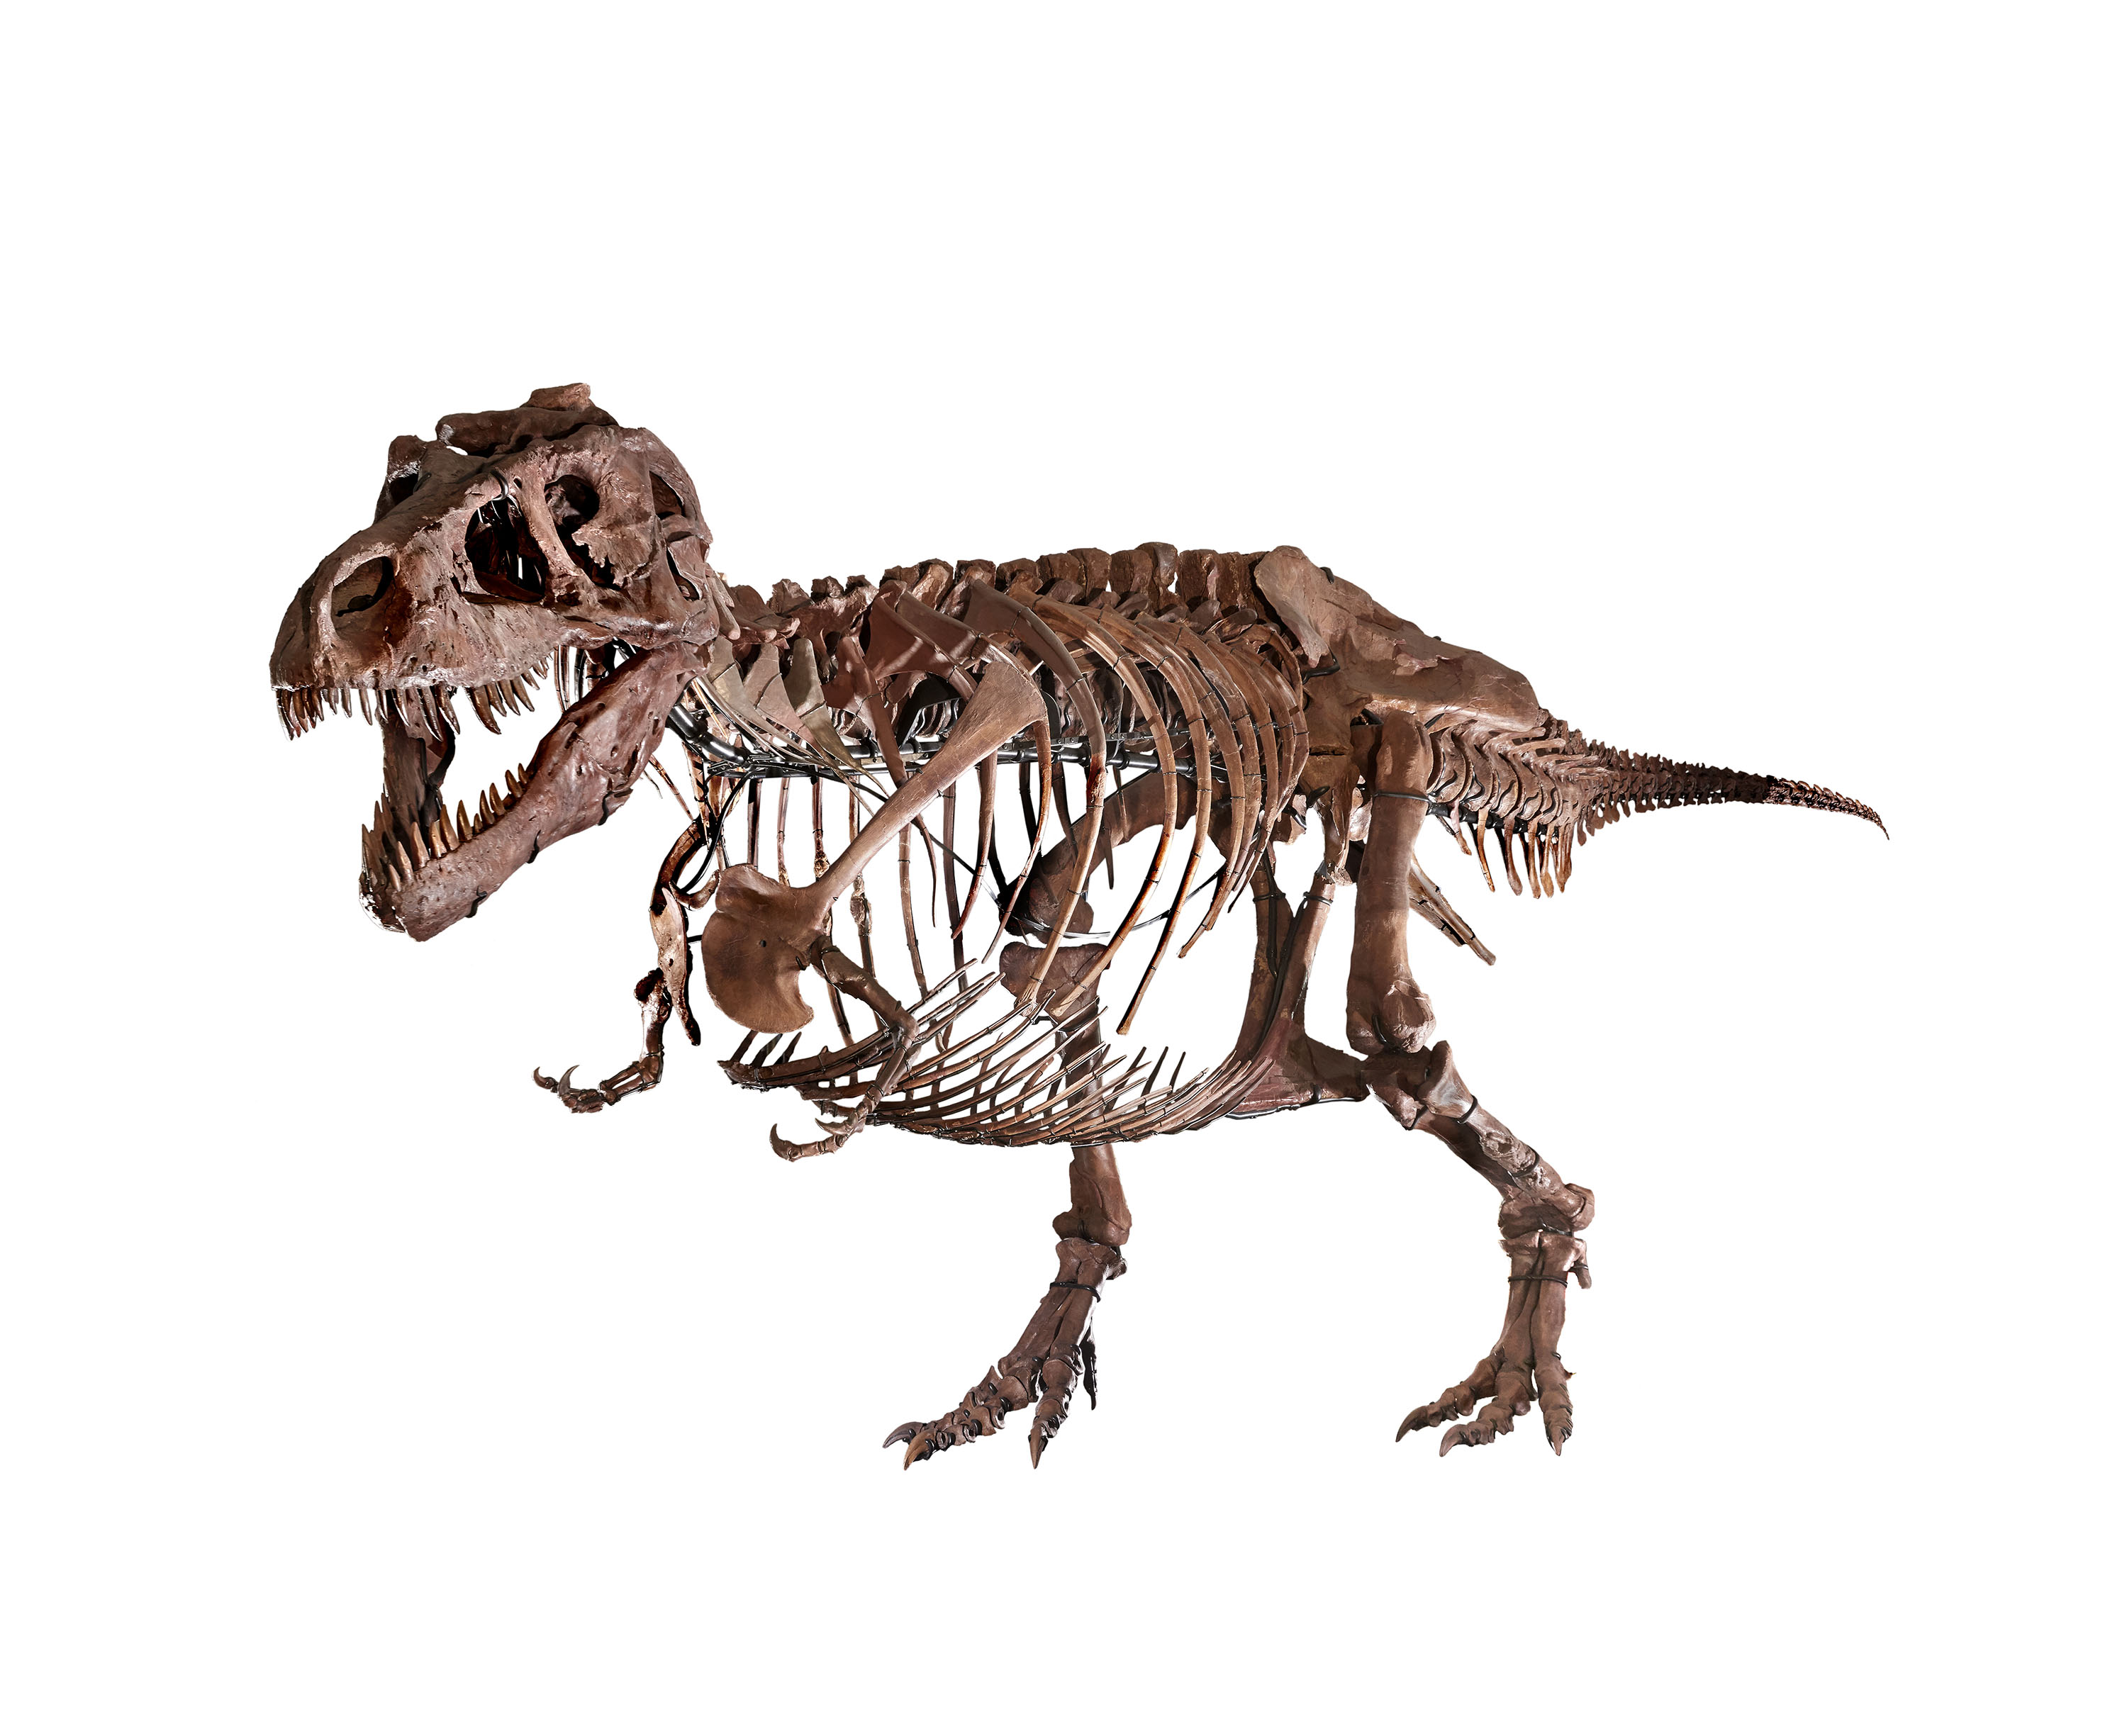 Skeleton of SUE the T. rex on a white background, after receiving scientific updates. The gastralia have been added, sort of like a second set of ribs lining the belly. Overall, the skeleton looks fuller and more upright than it did previously.